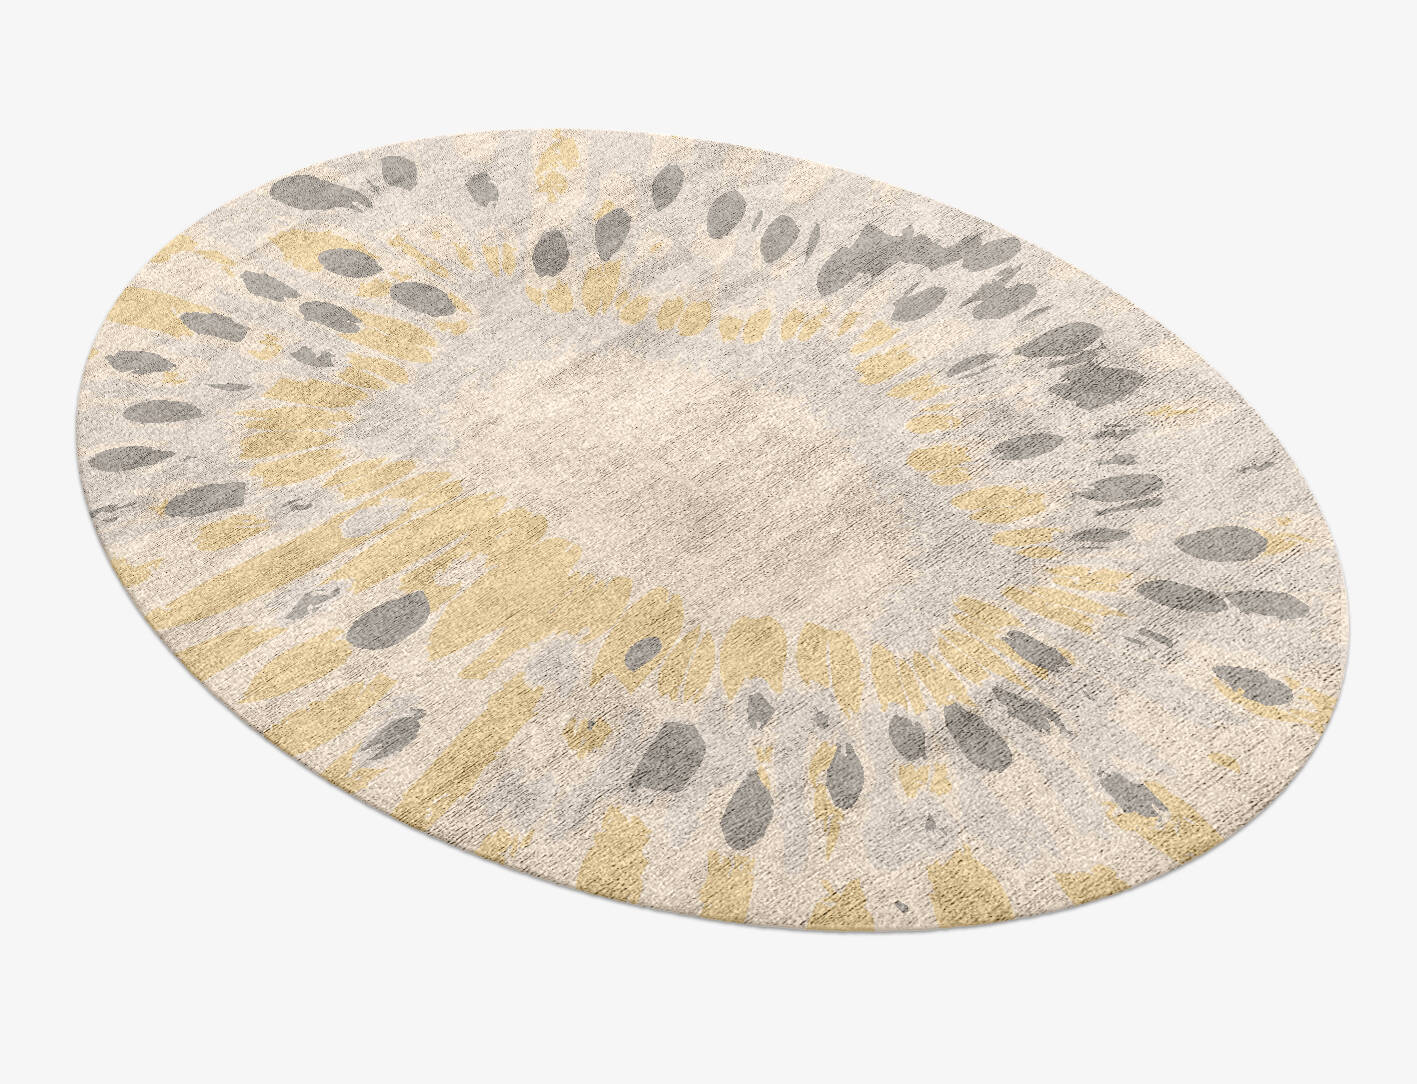 Mucogee Abstract Oval Hand Knotted Bamboo Silk Custom Rug by Rug Artisan